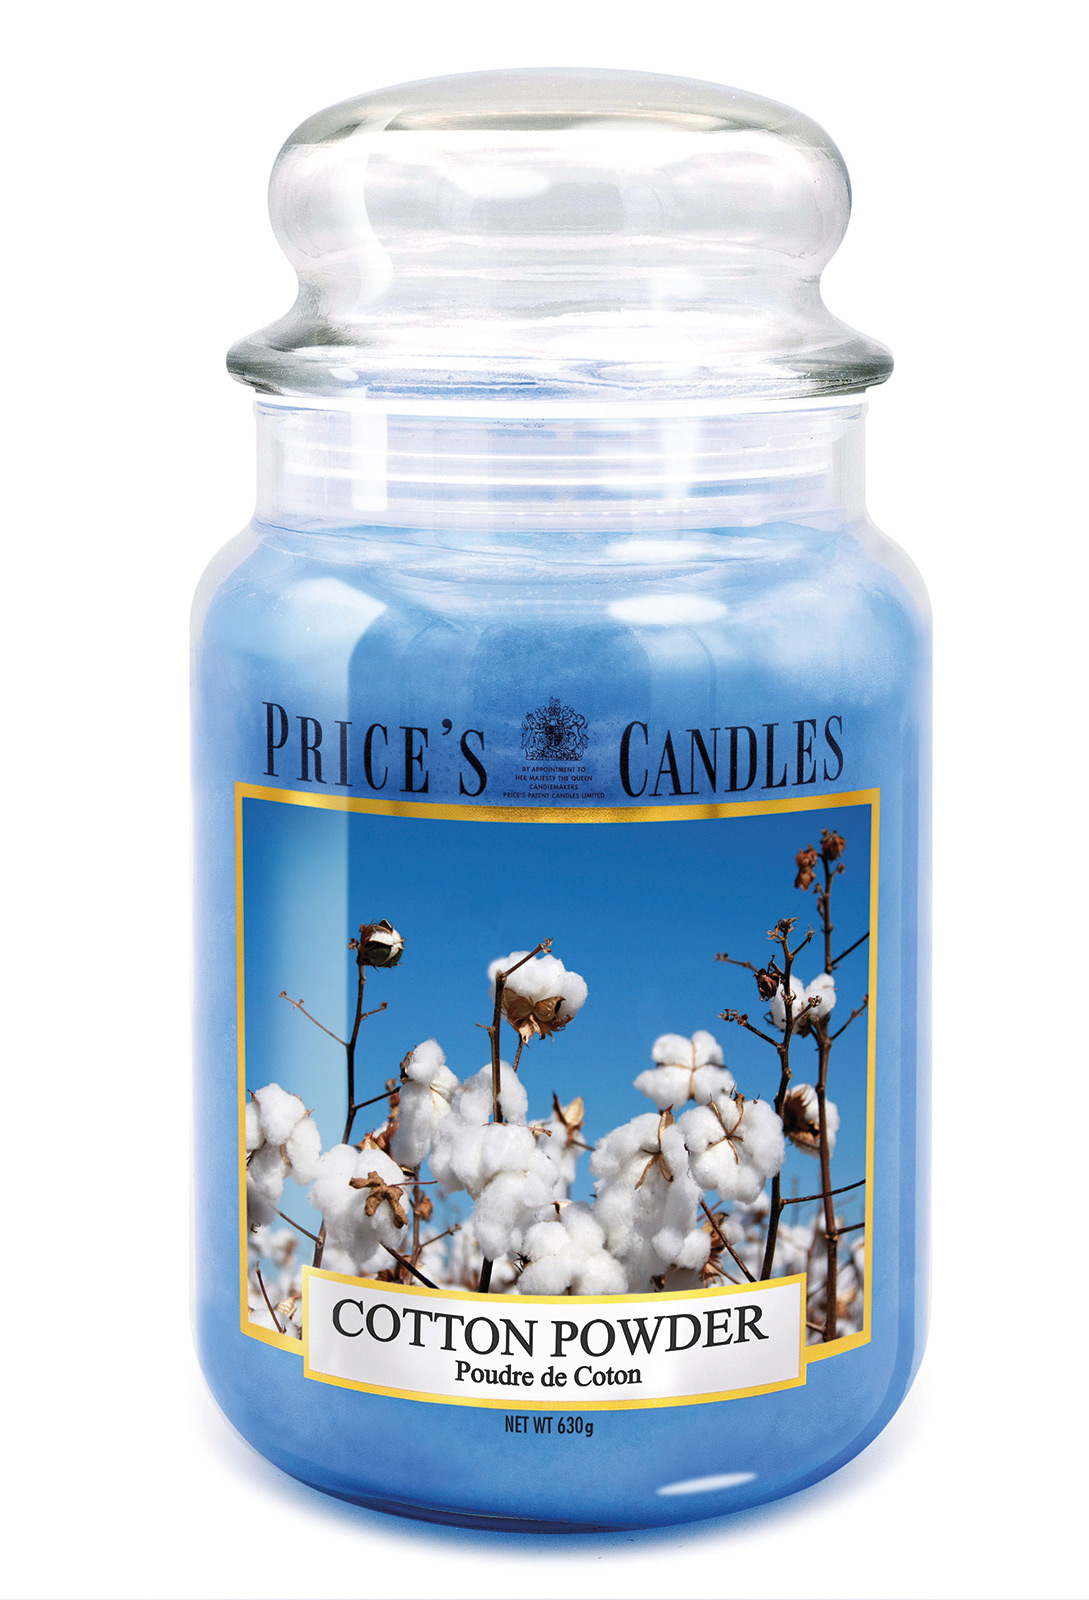 Prices Candle "Cotton Powder" 630g 